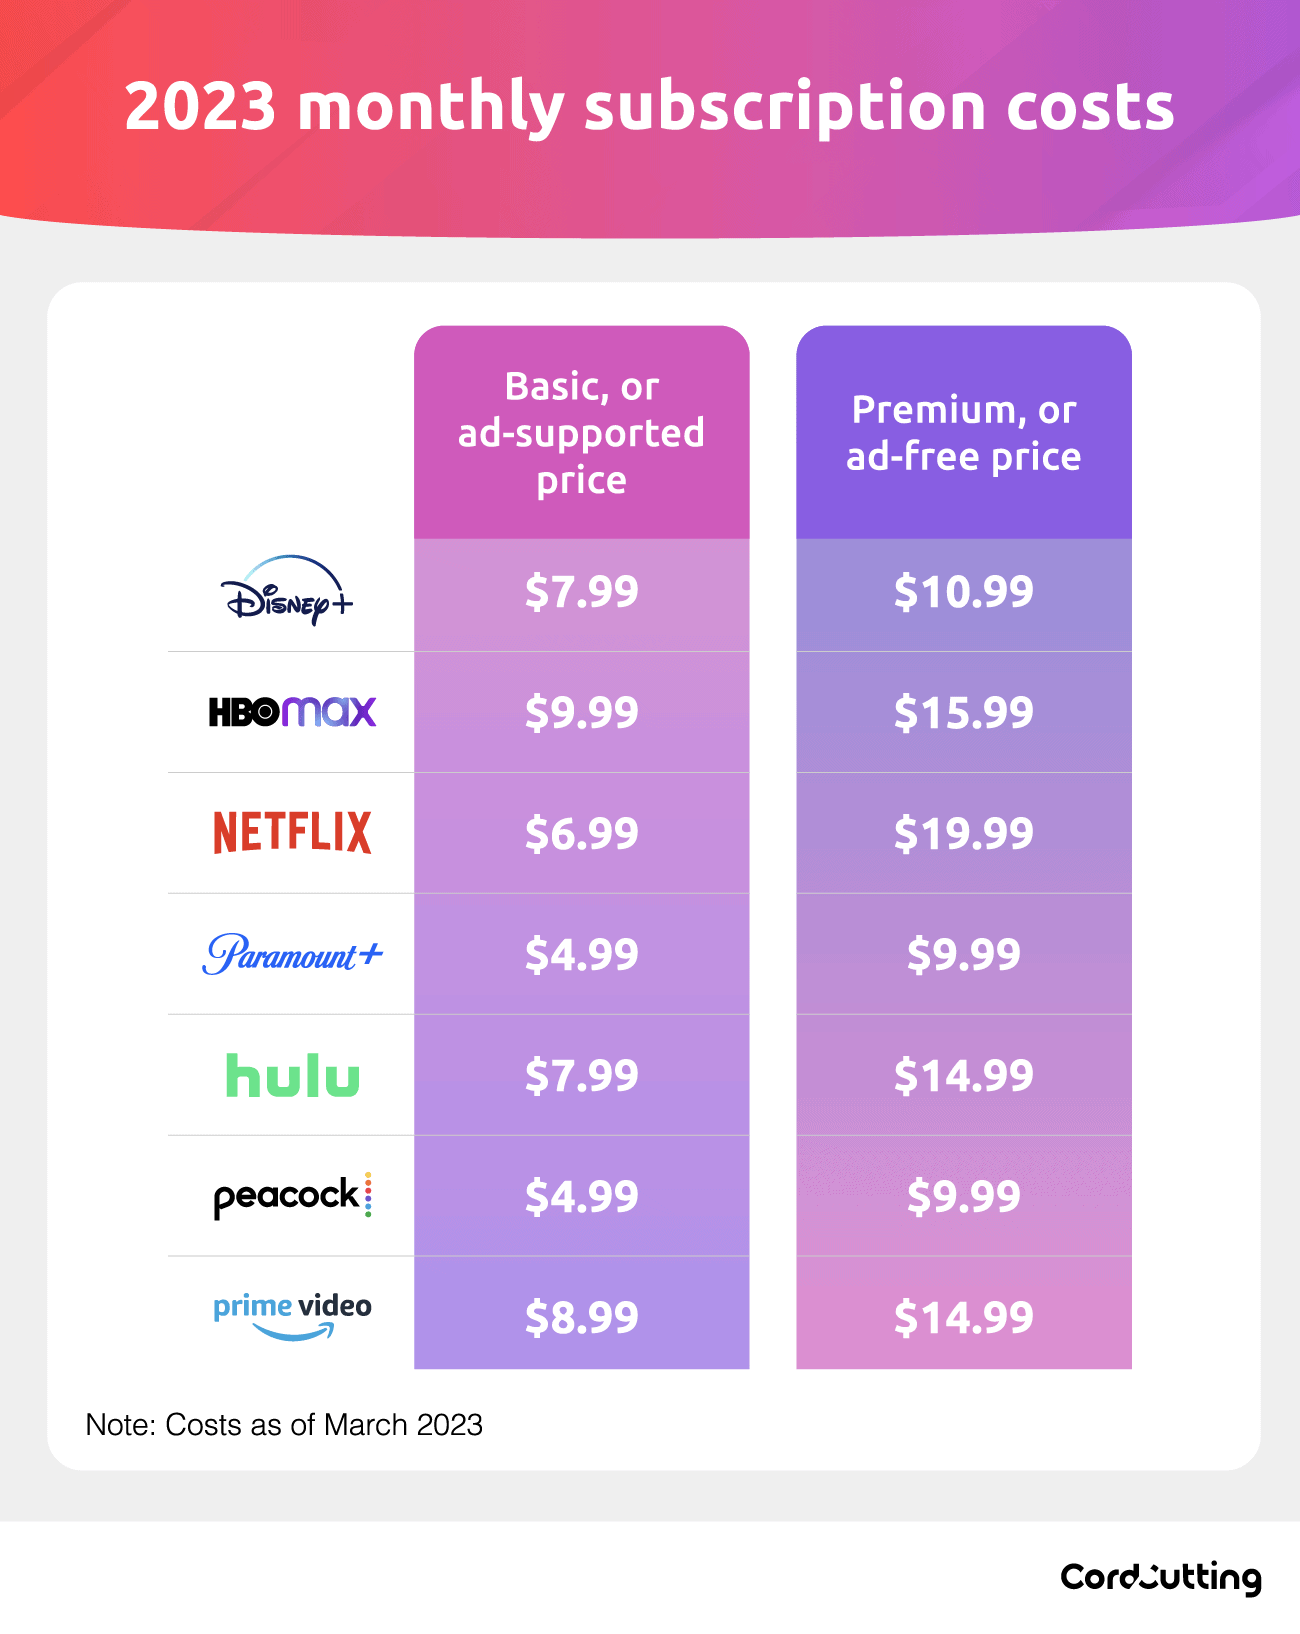 2023 monthly subscription costs